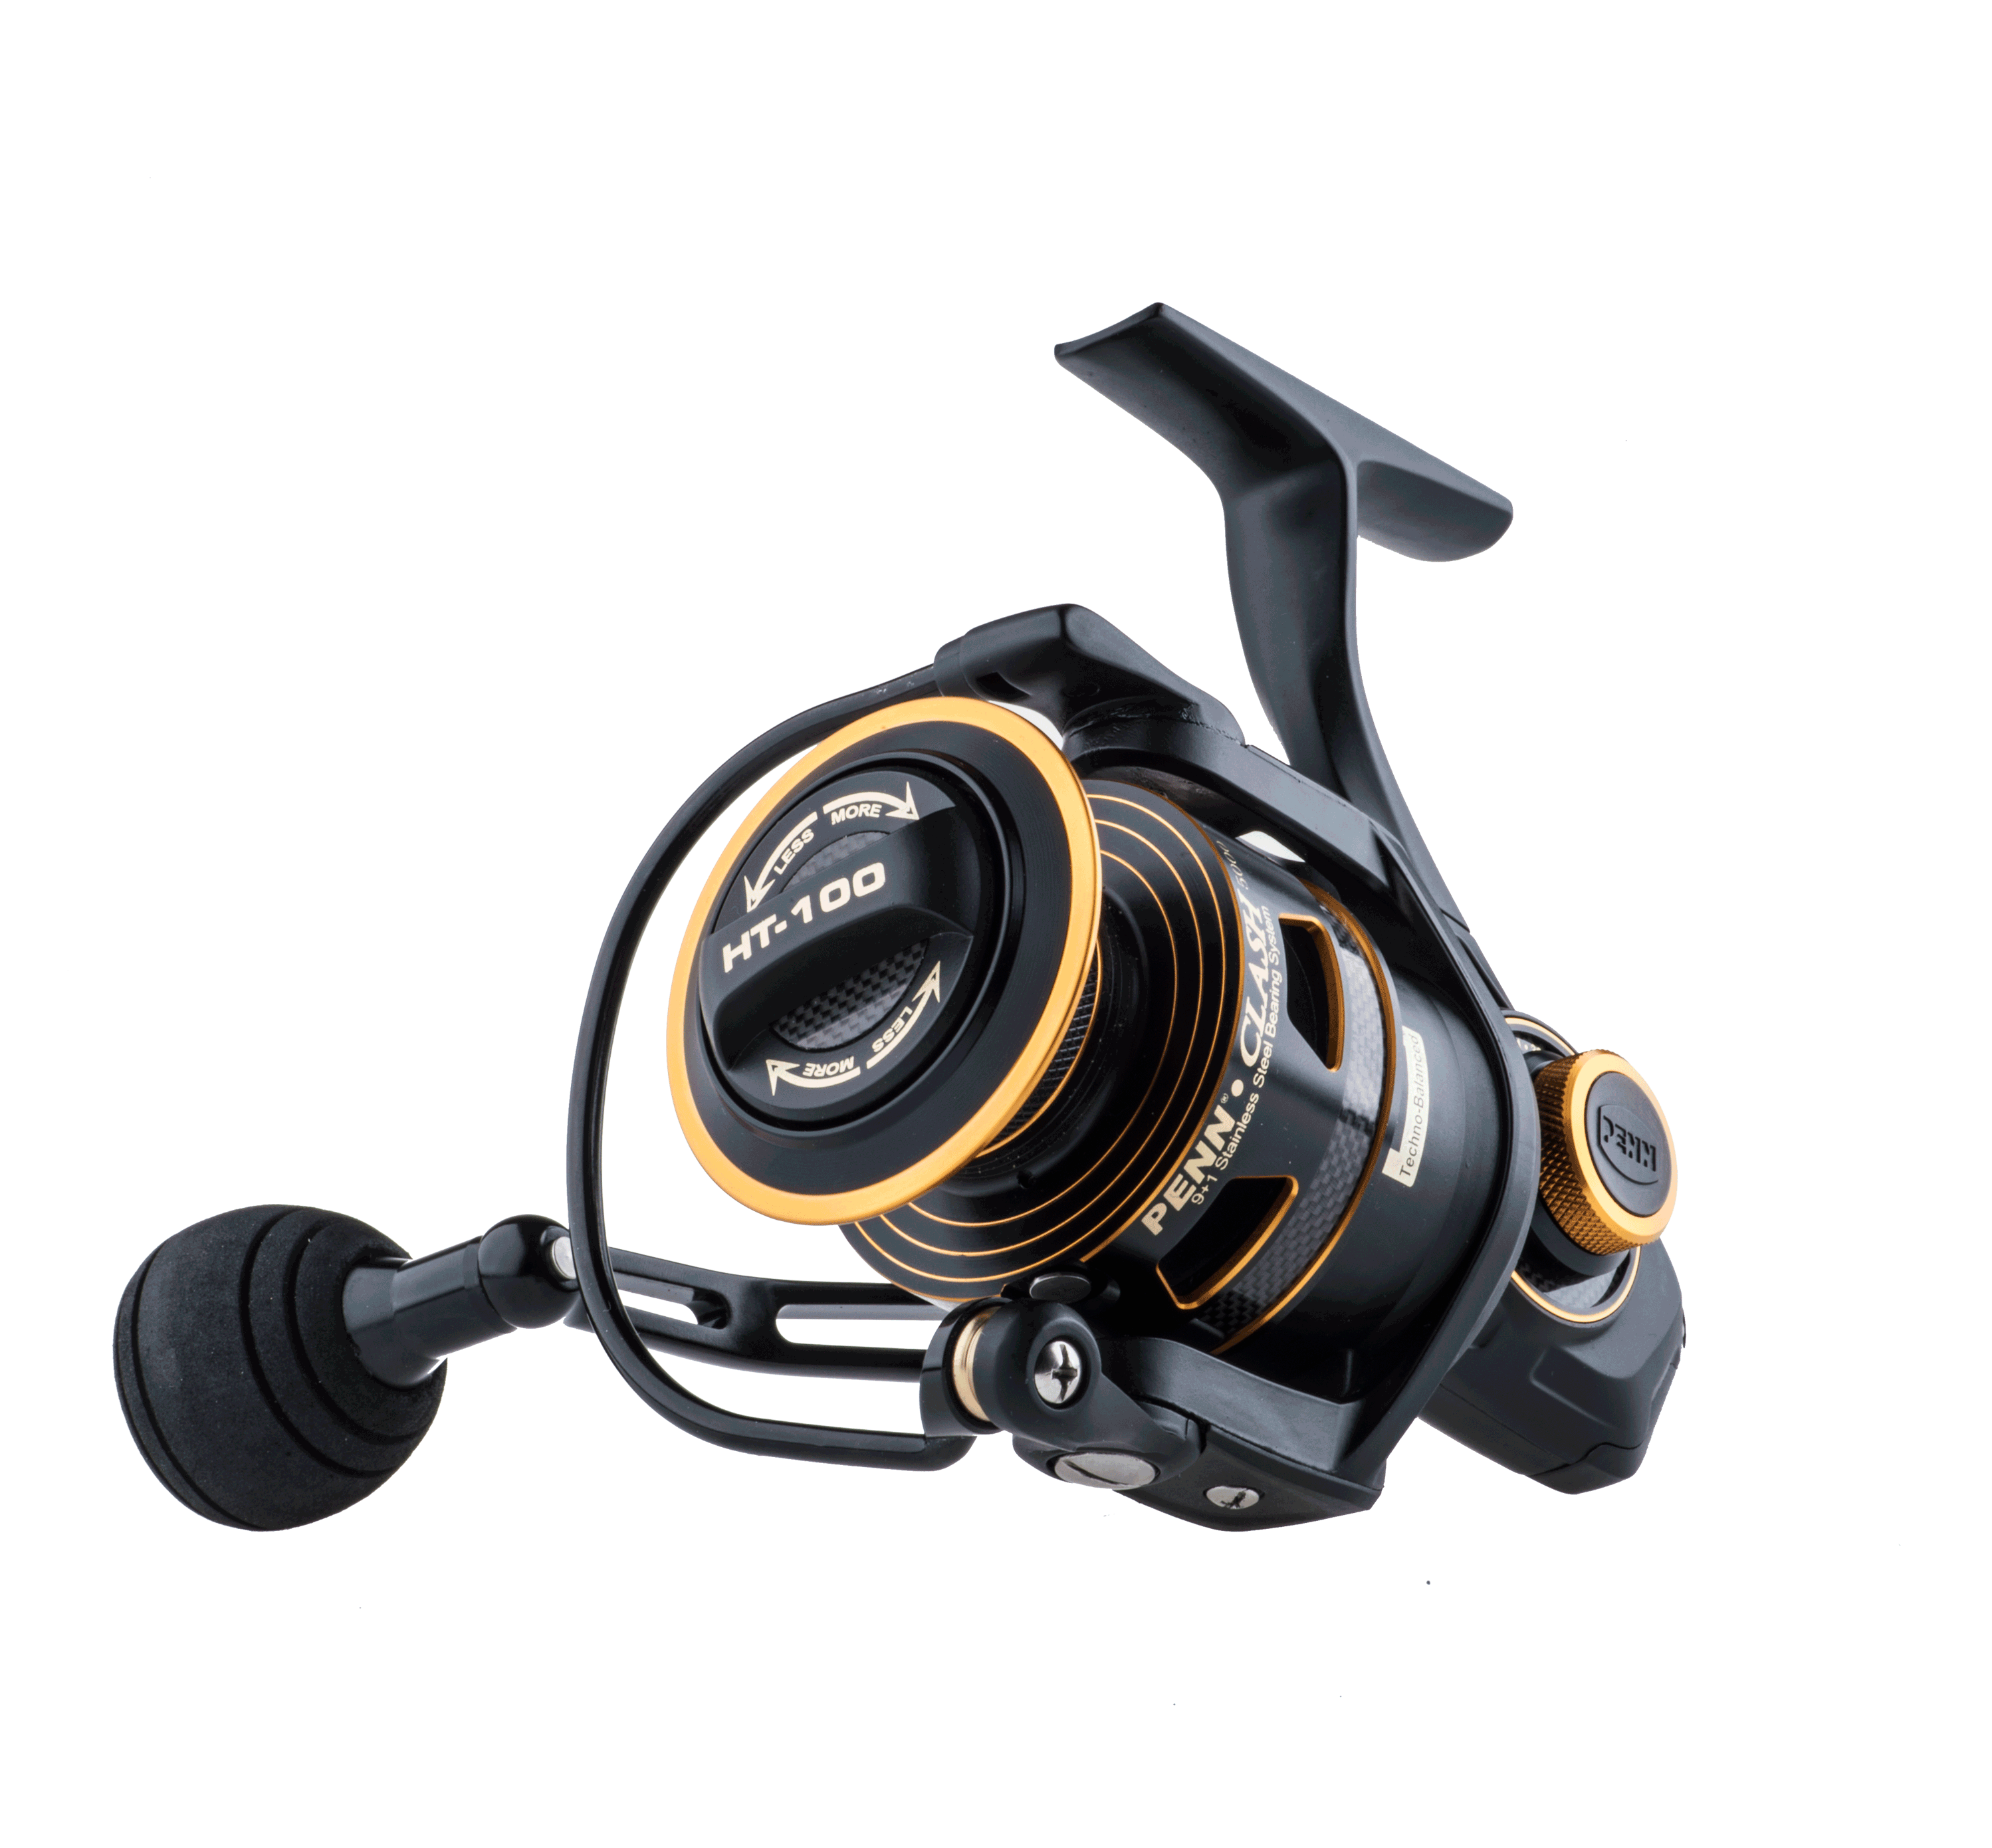 Product Review-PENN Clash Spinning Reel - Wrightsville Beach Fishing Report  with Capt. Jot Owens